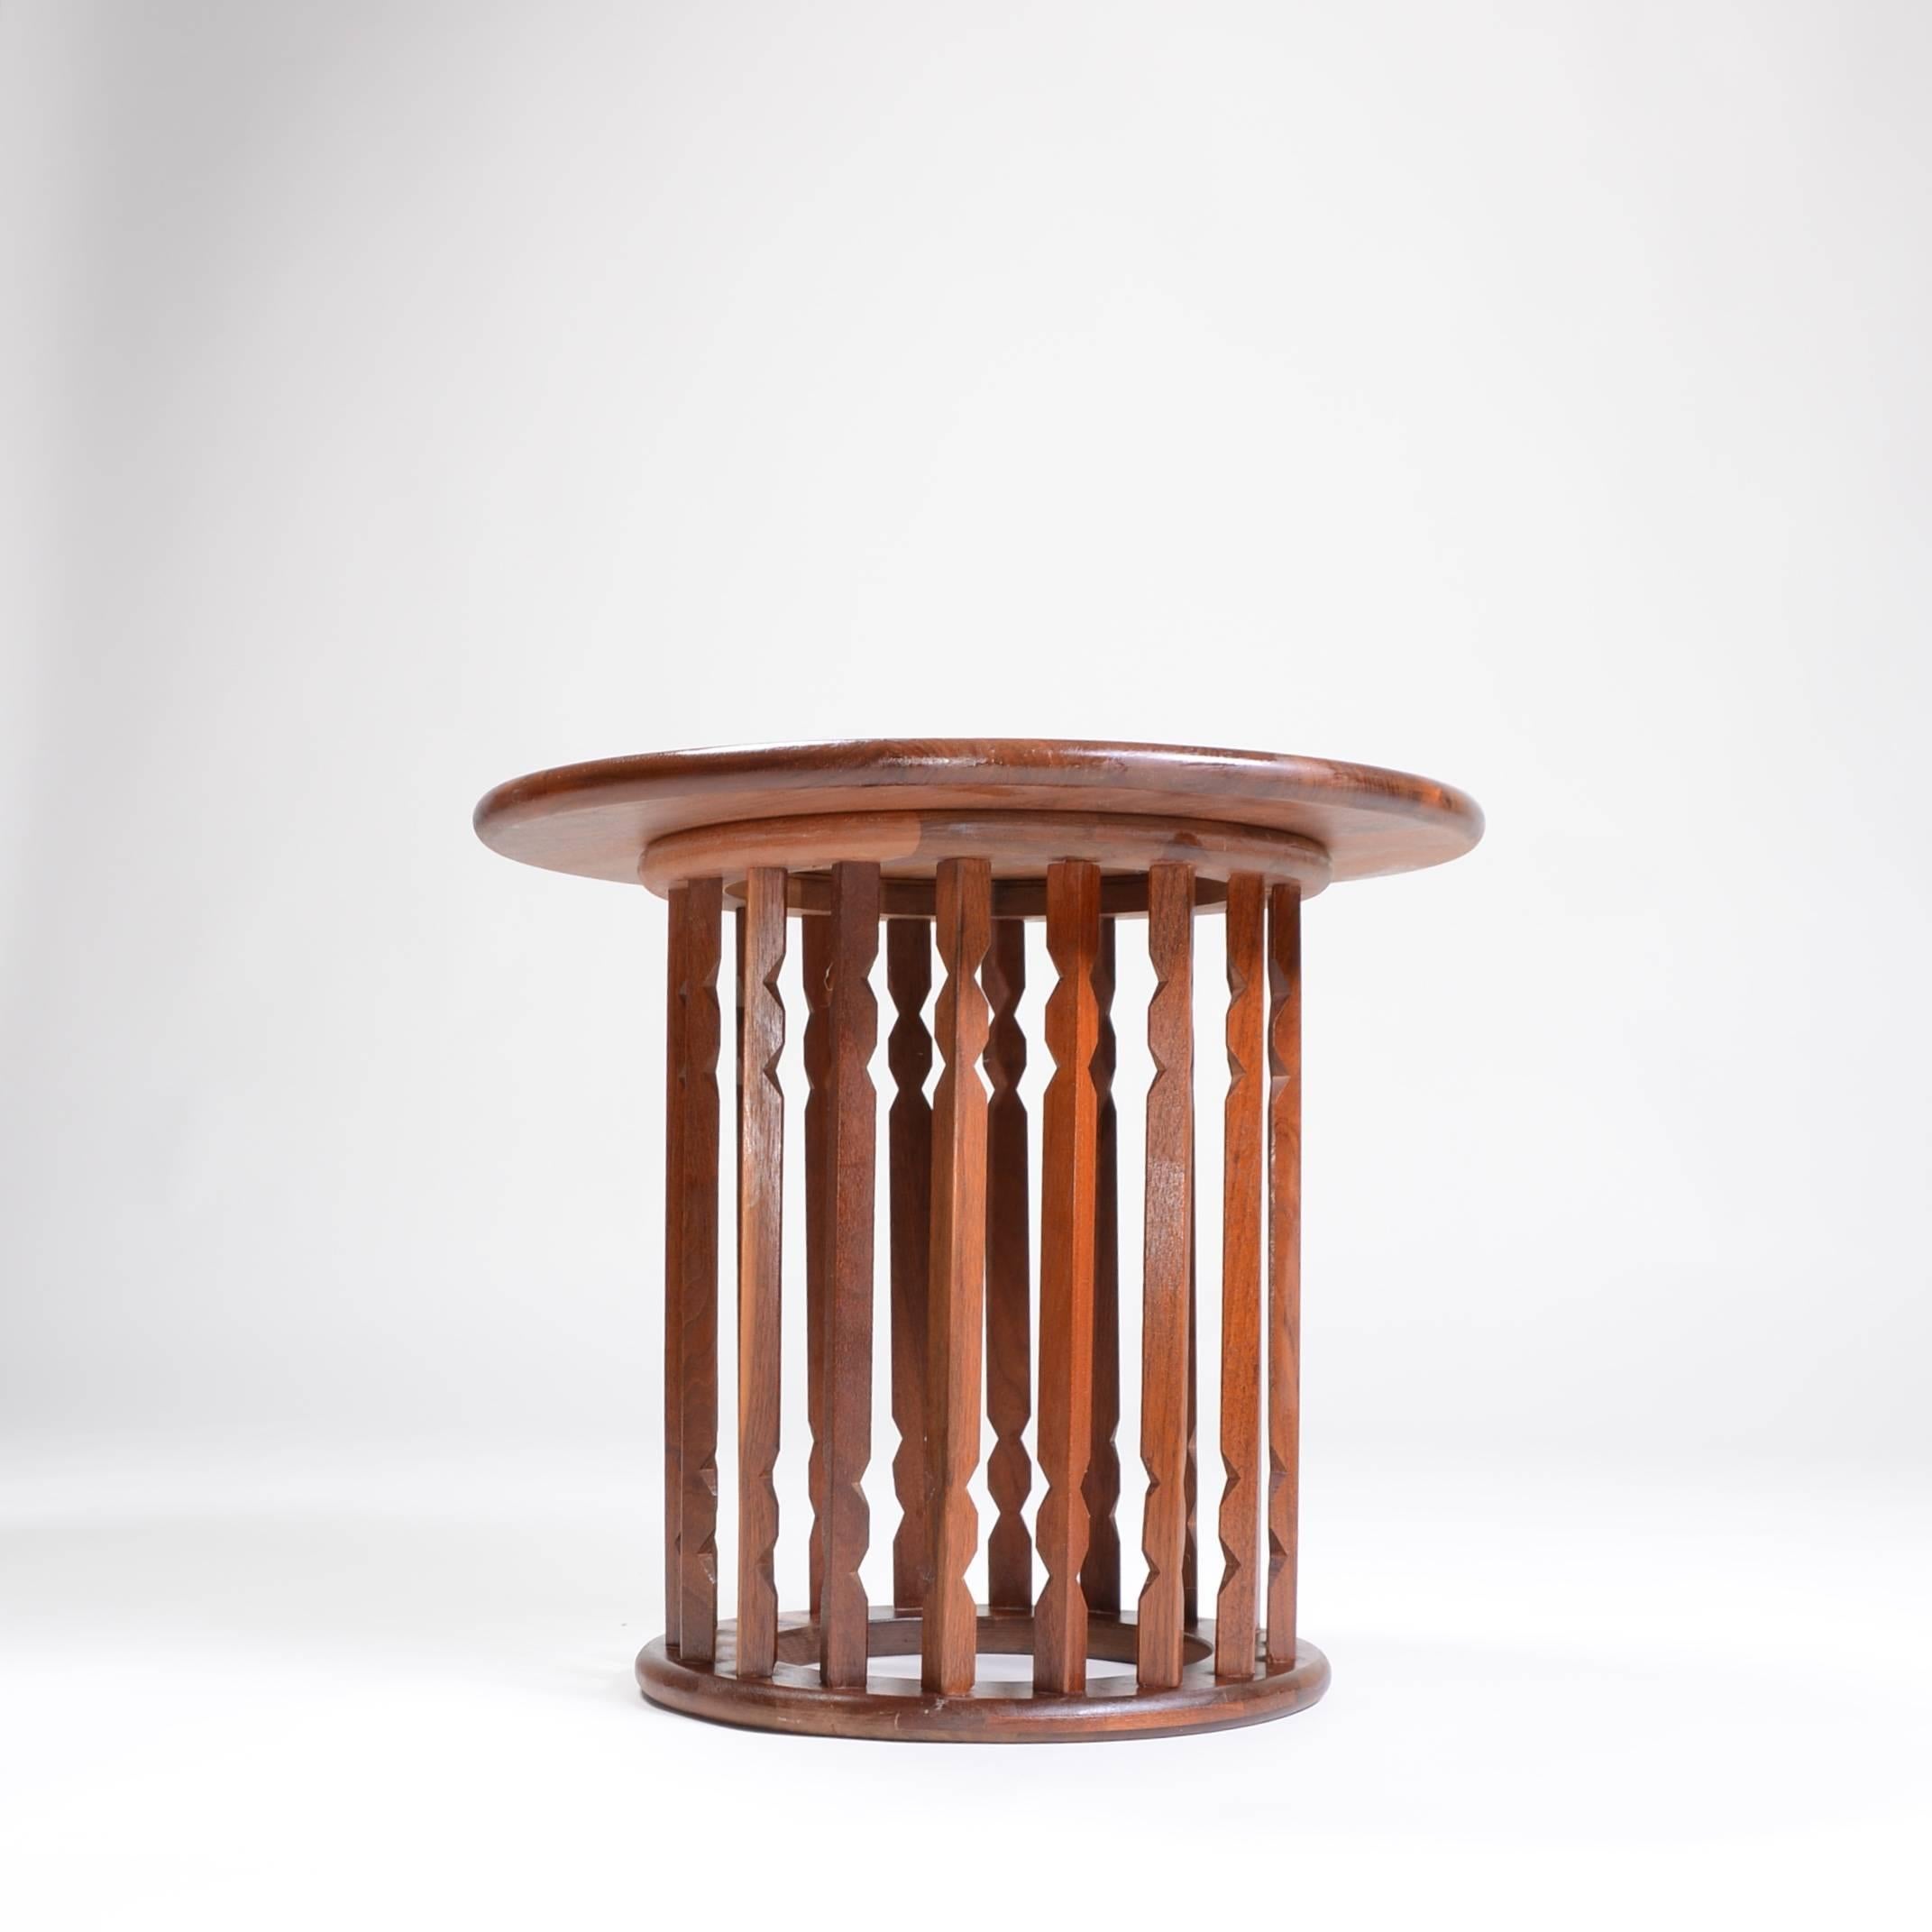 This is solid walnut end table in the style of Arthur Umanoff.